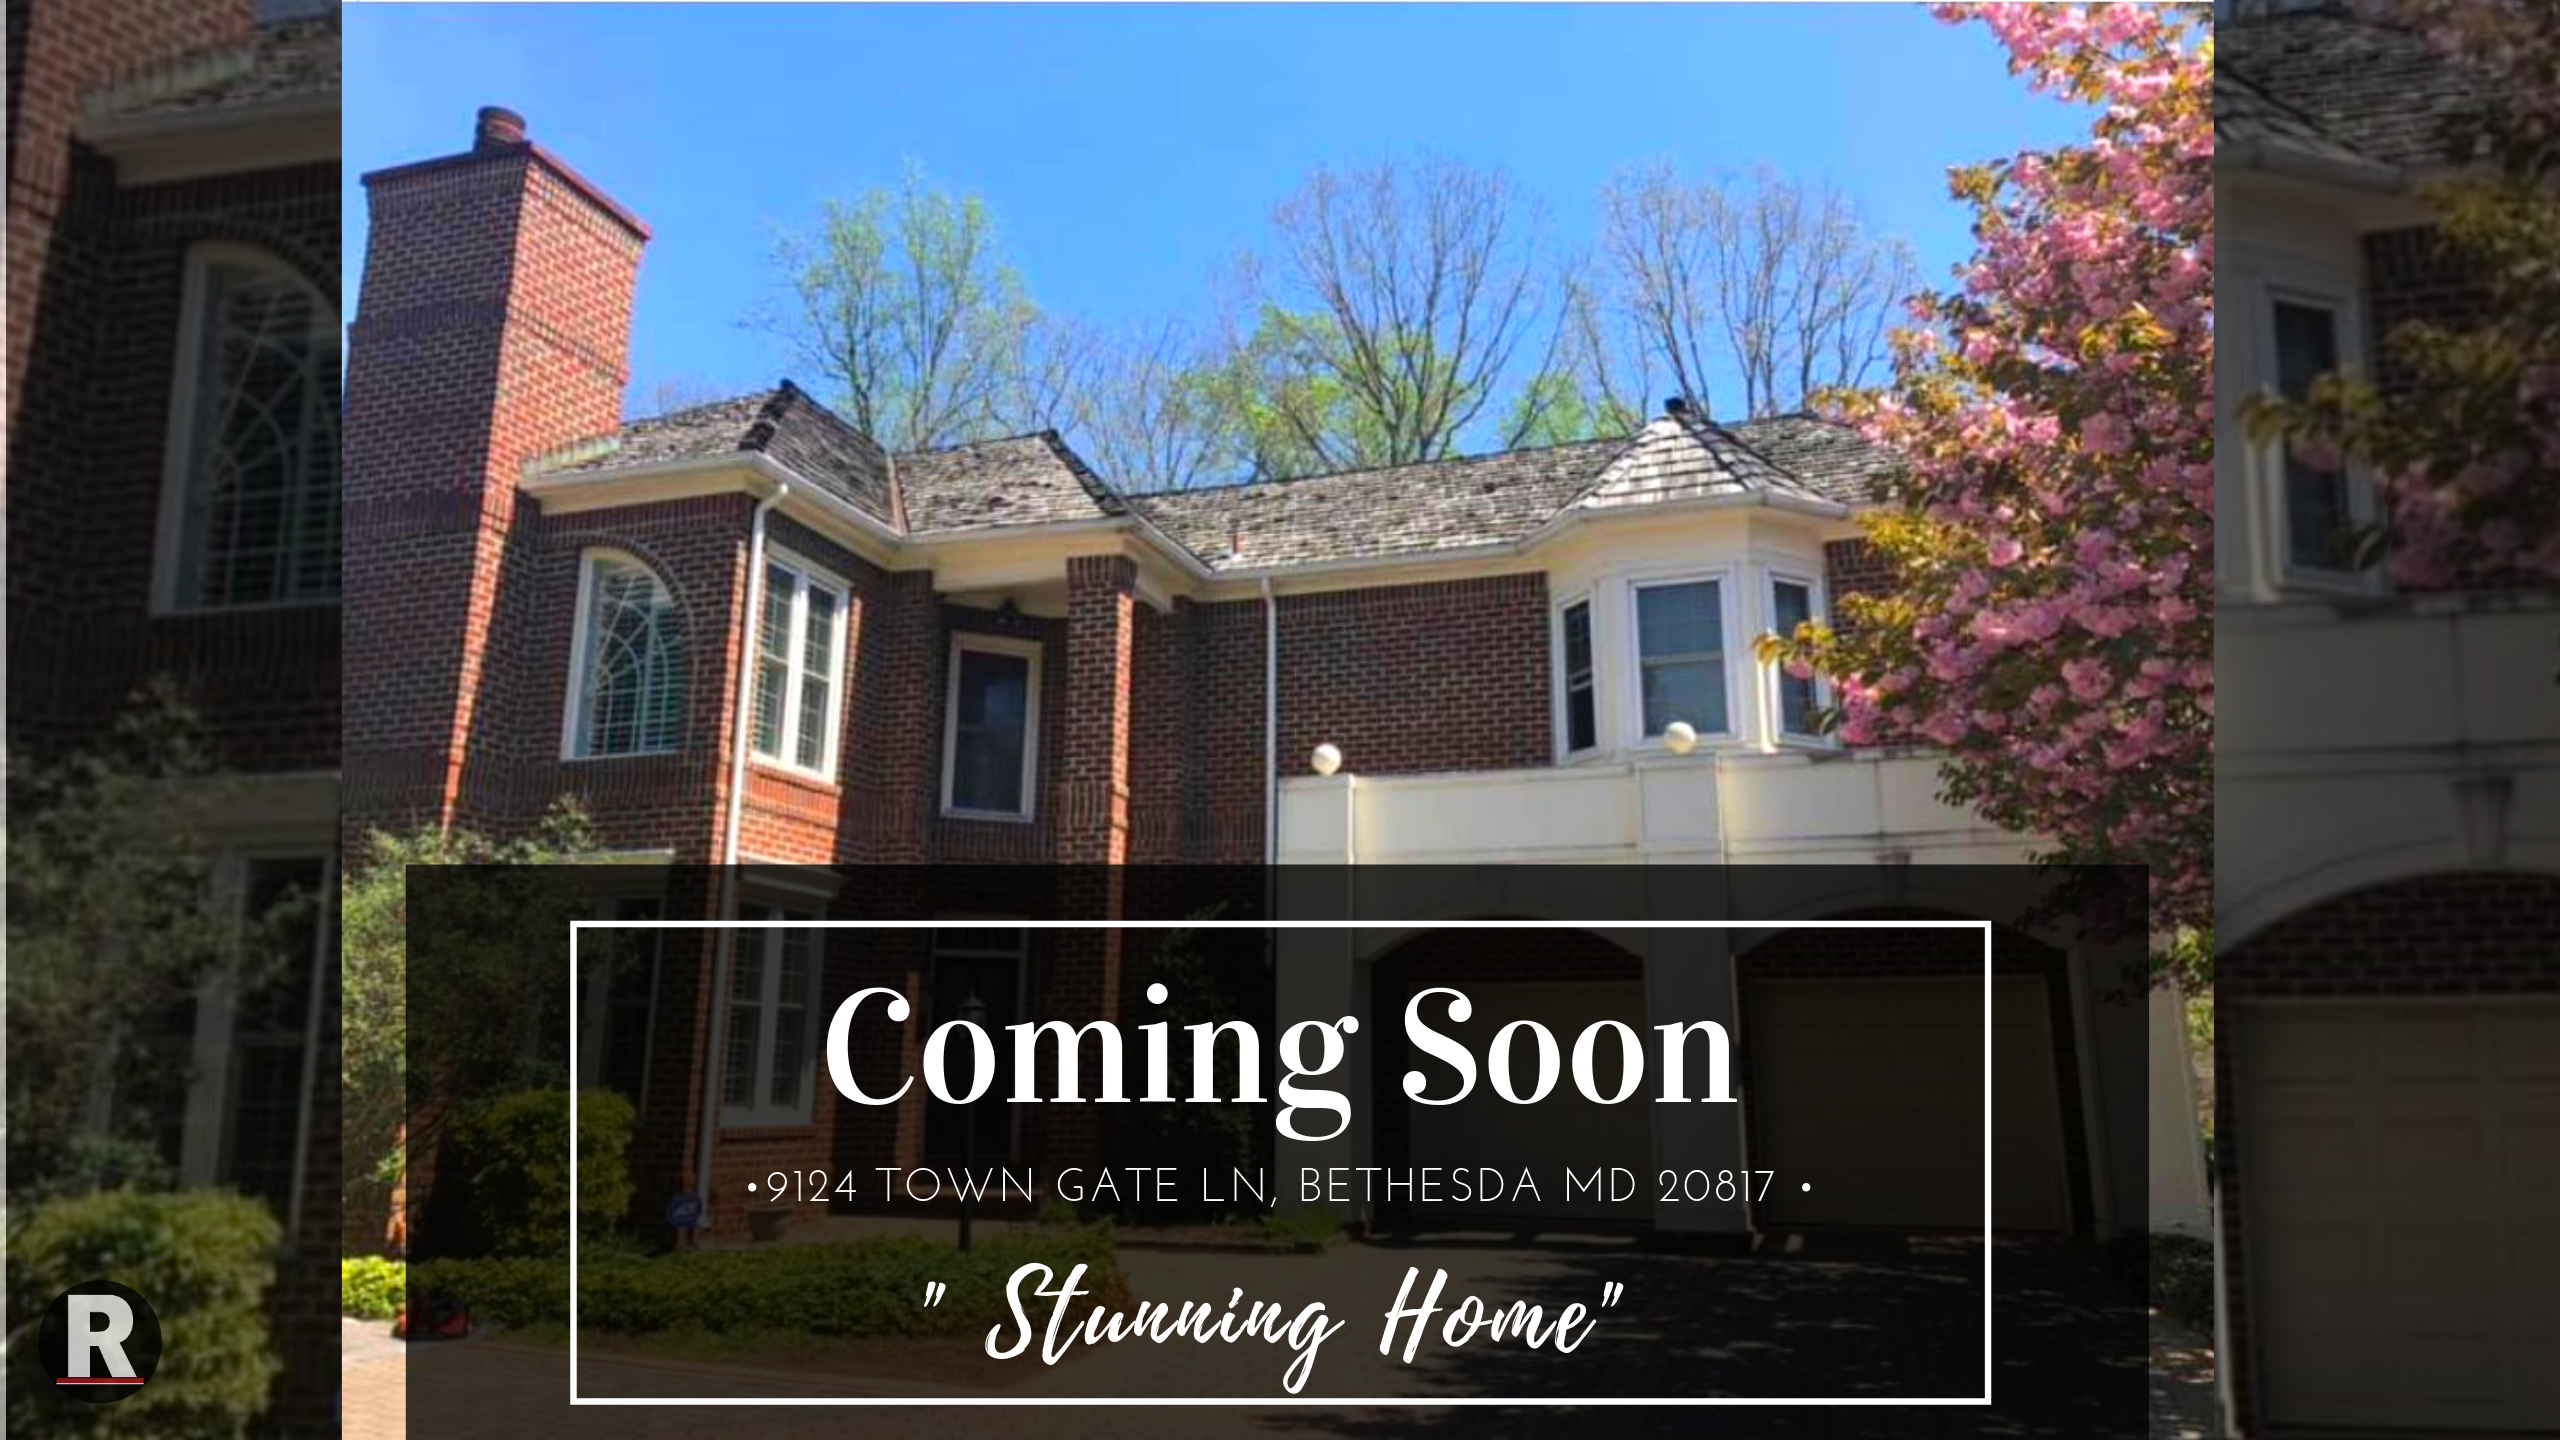 Coming Soon! 9124 Town Gate Ln, Bethesda MD 20817